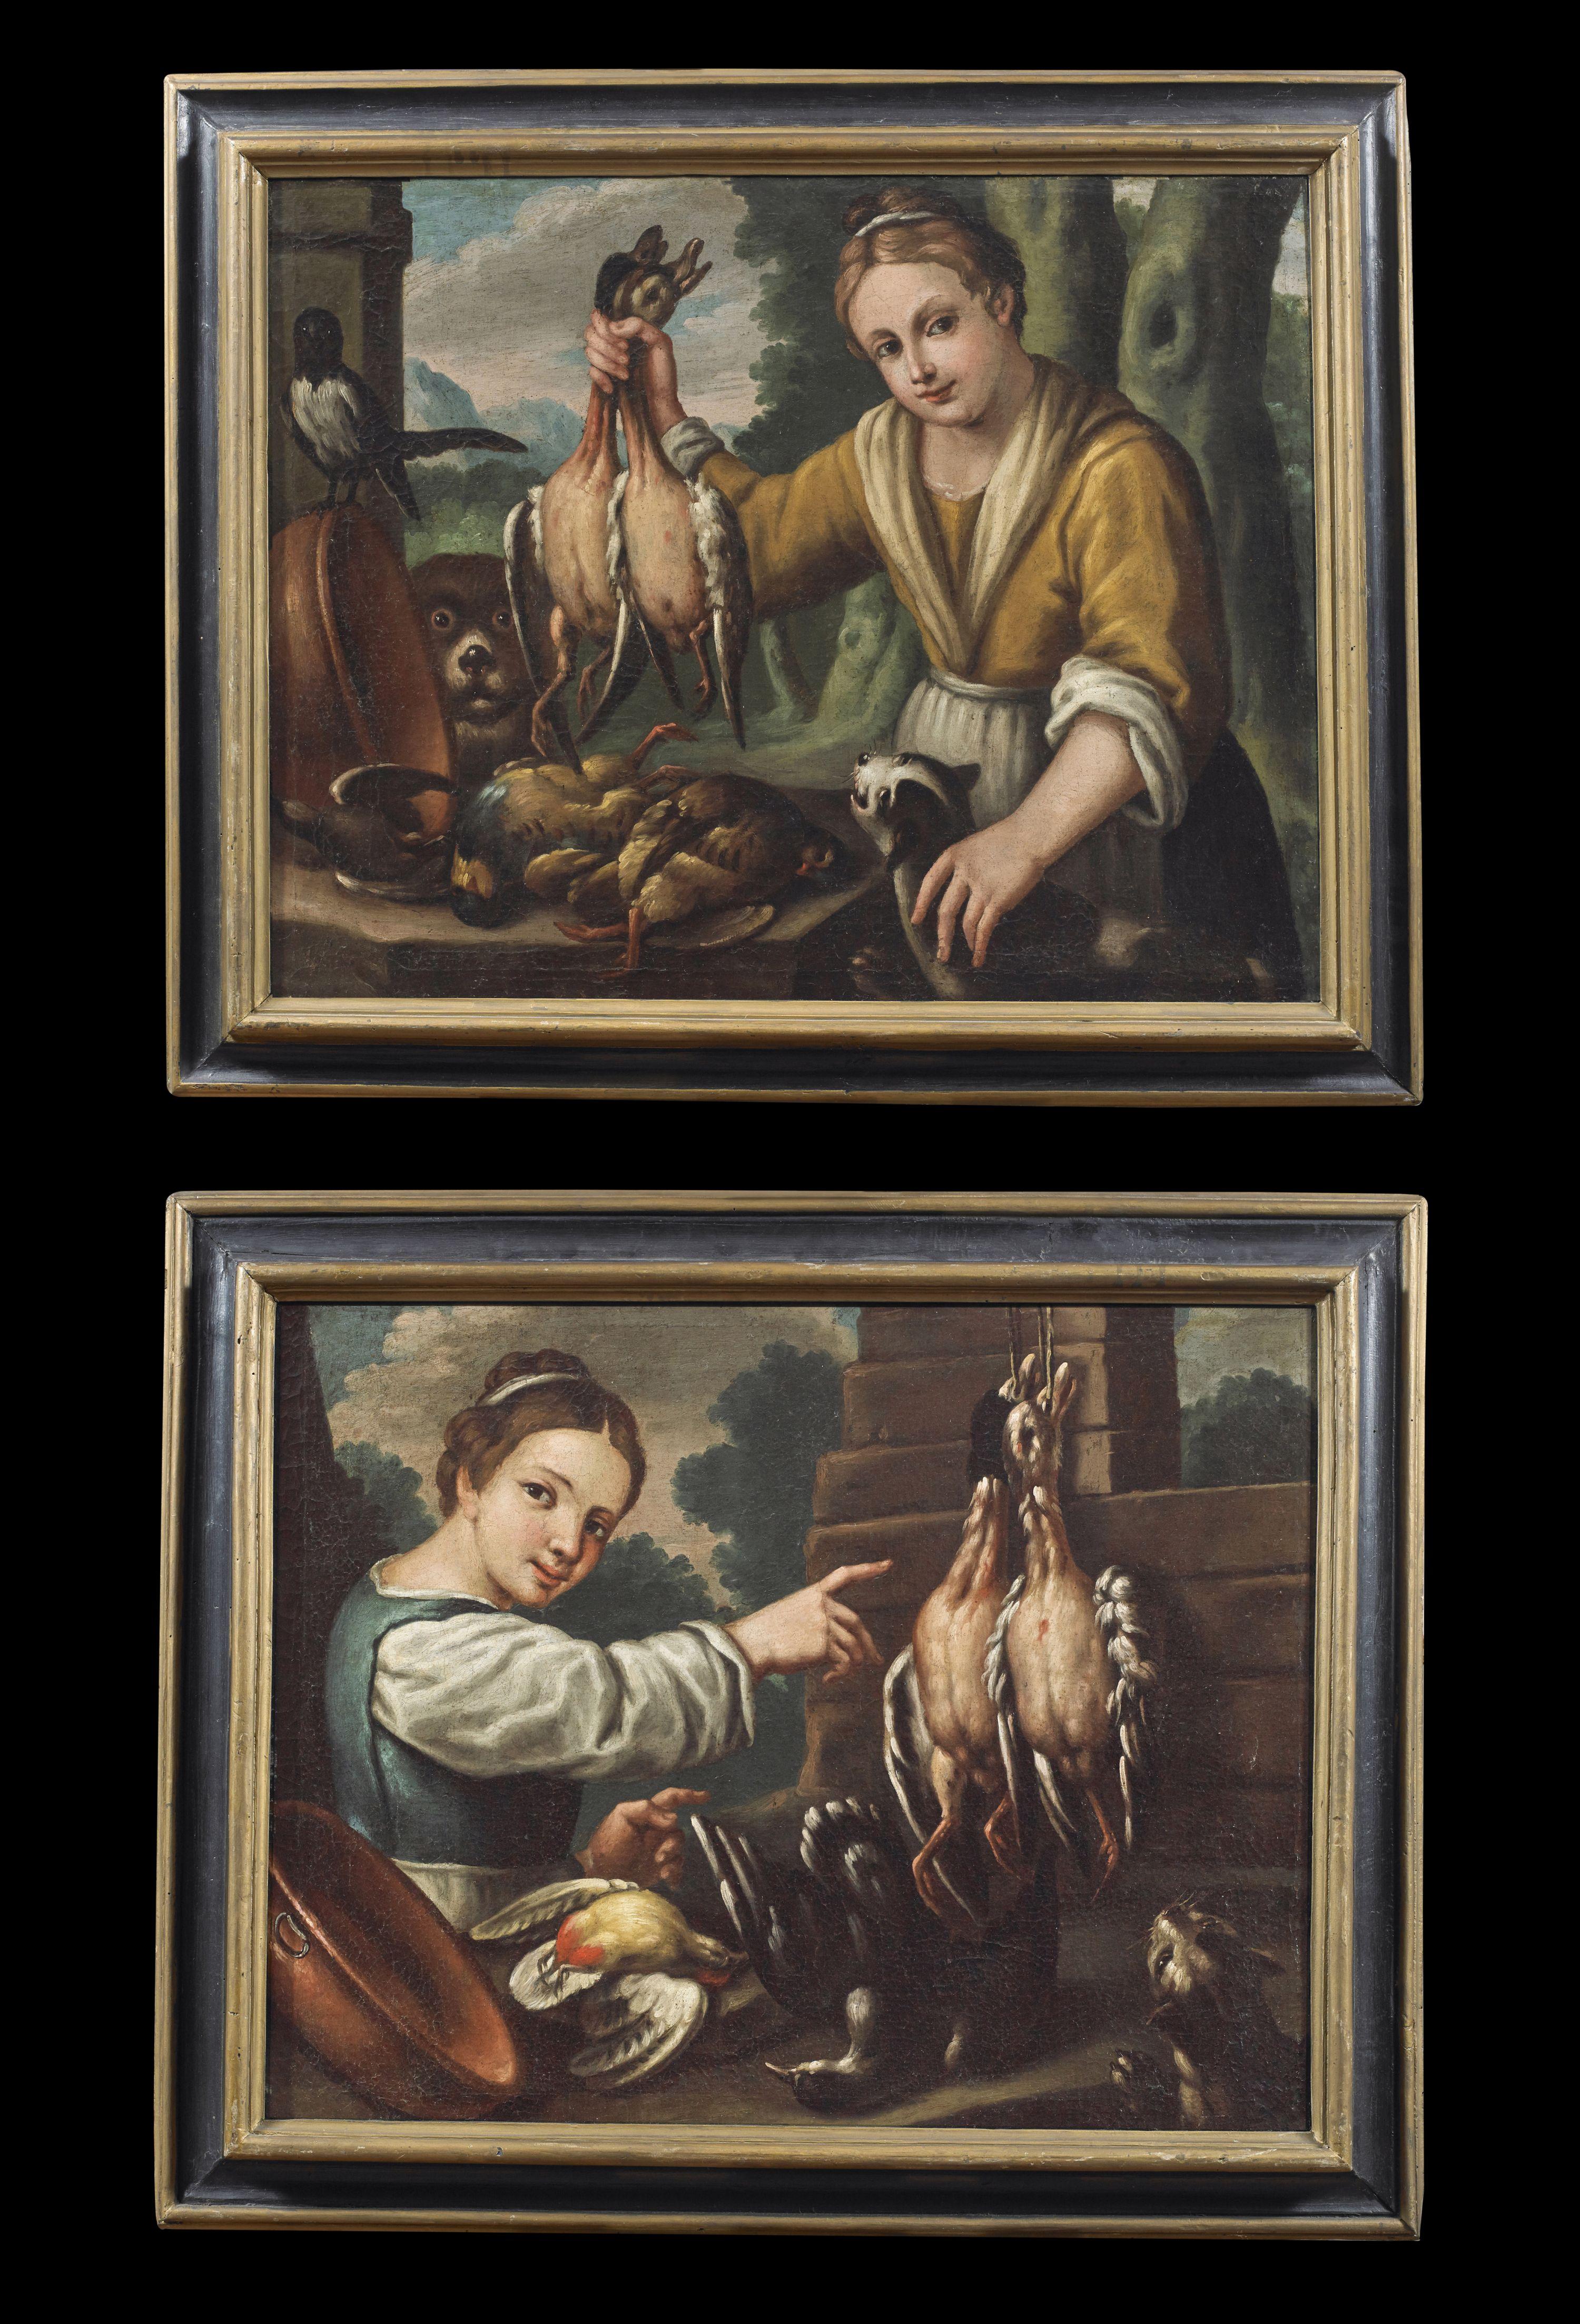 Pair of paintings, still on the first canvas, oil on canvas measuring 70 x 82 cm without frame and 80 x 92 cm with coeval frame by the painter Felice Boselli (Piacenza 1650 - Parma 1732) depicting a still life with popular characters, animals and